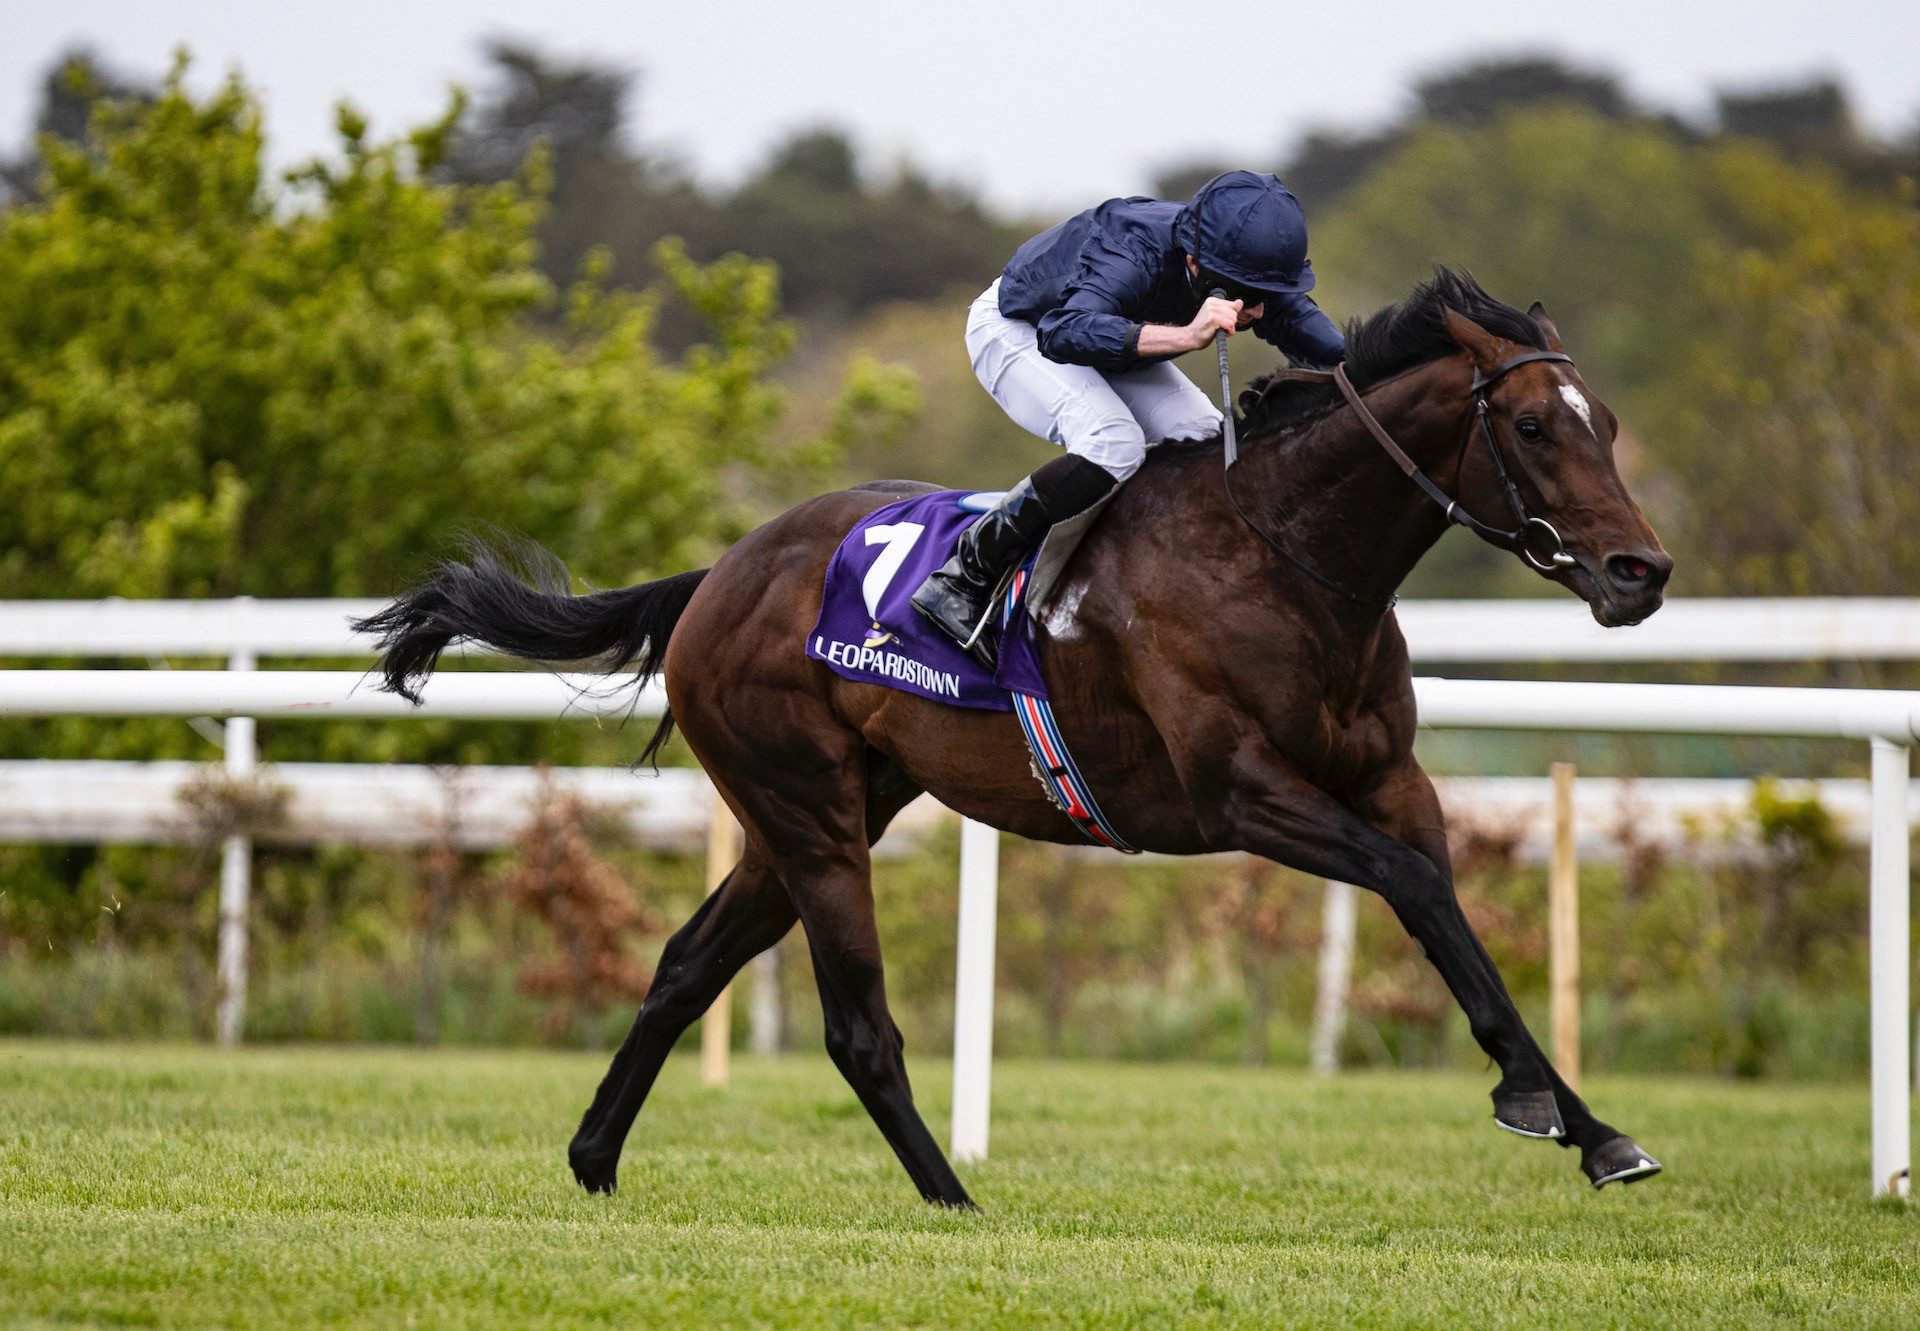 Bolshoi Ballet (Galileo) Storms Clear In The Group 3 Derby Trial At Leopardstown